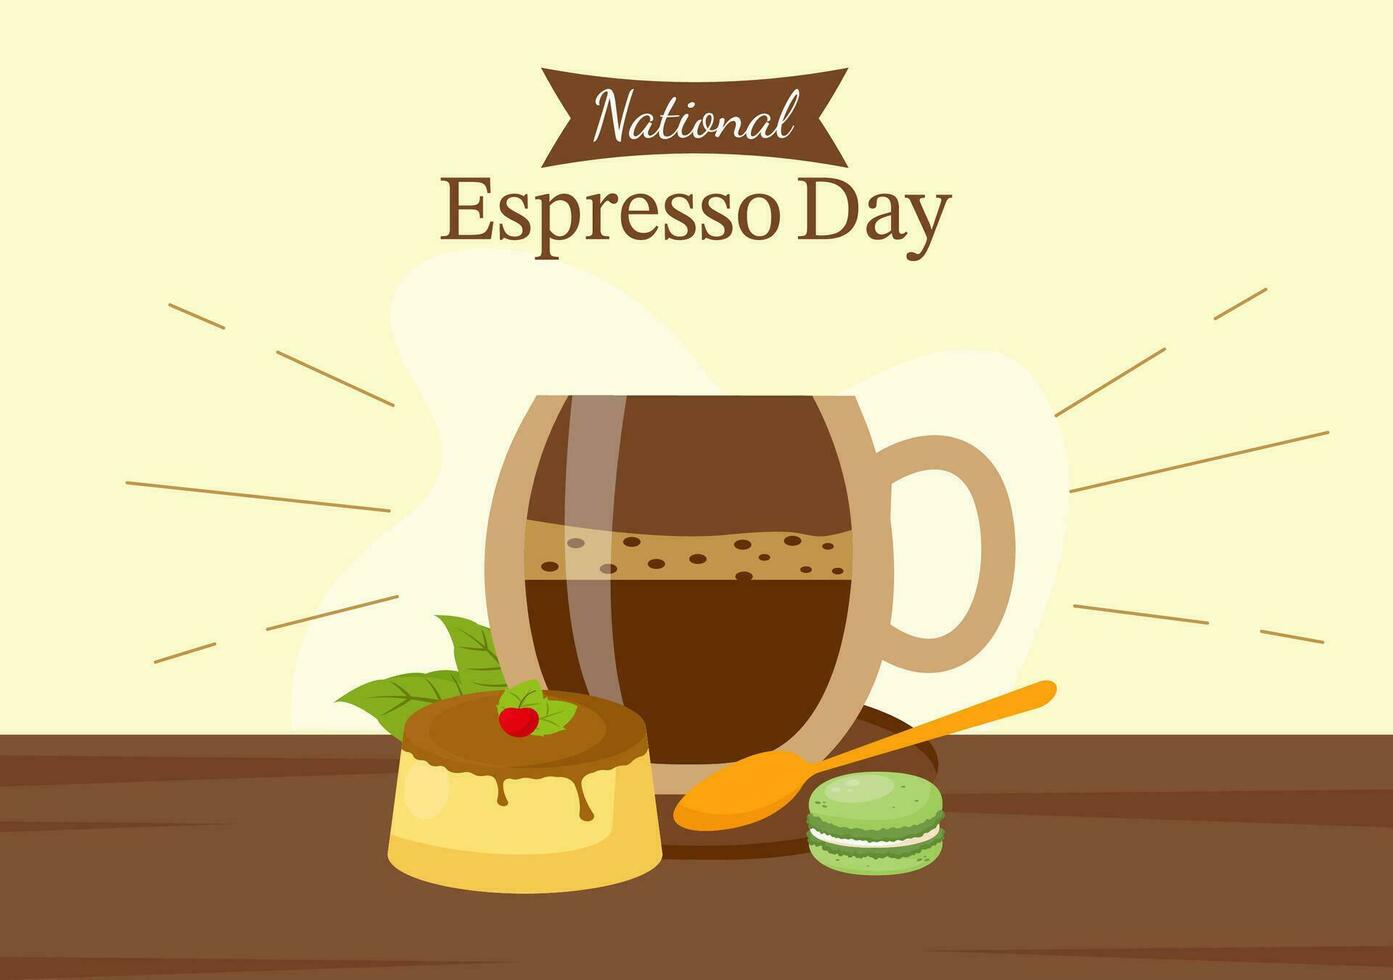 National Espresso Day Vector Illustration on November 23 with Cup of Coffee with Bean for Promotion or Poster in Flat Cartoon Background Design